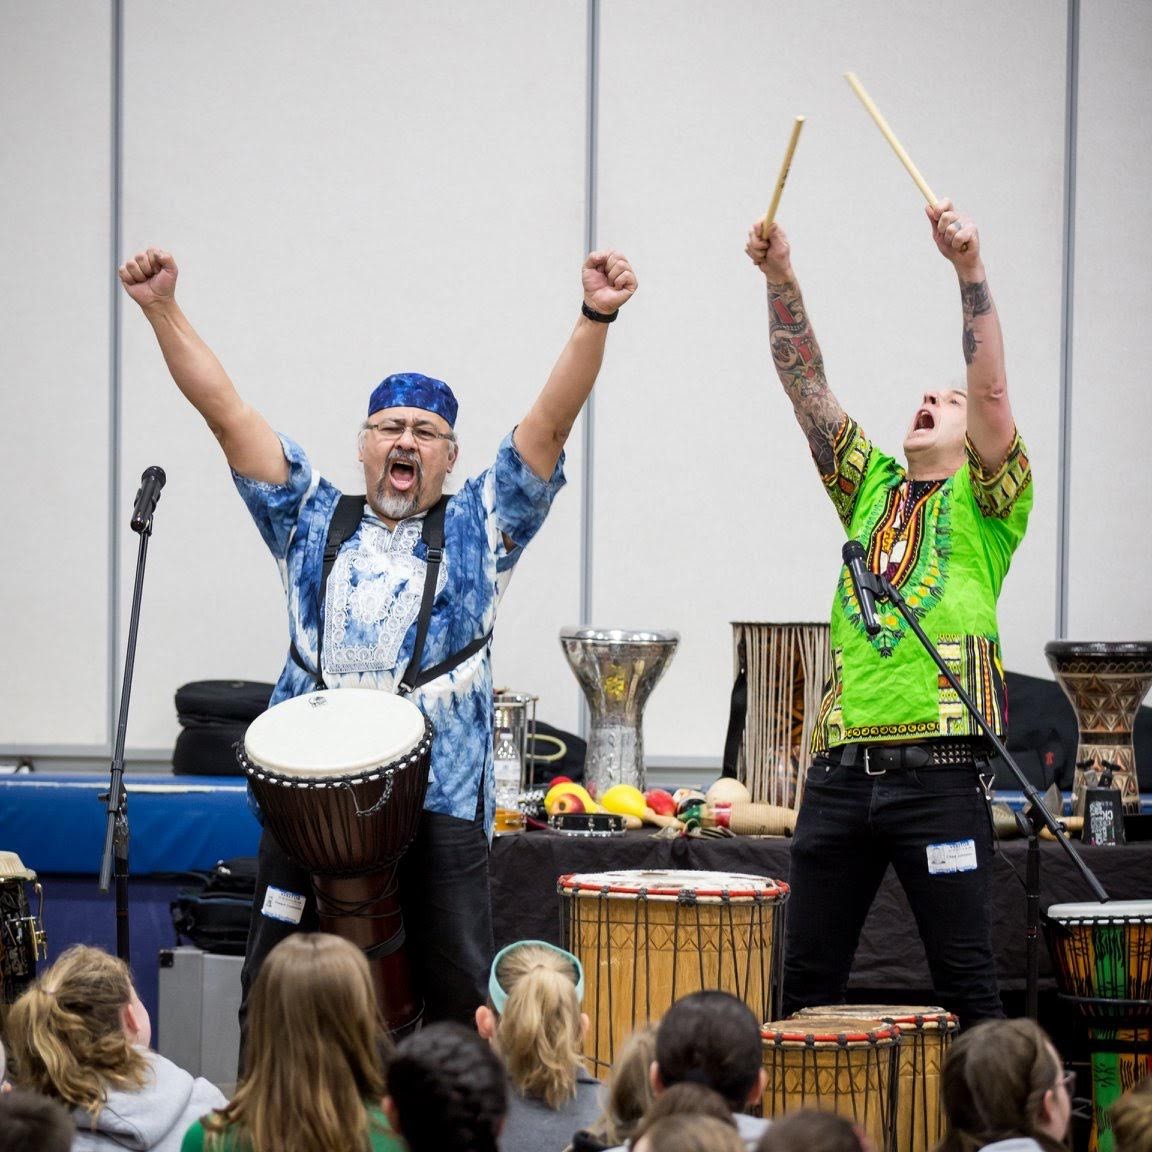 Drummers with their arms raised holding drum sticks